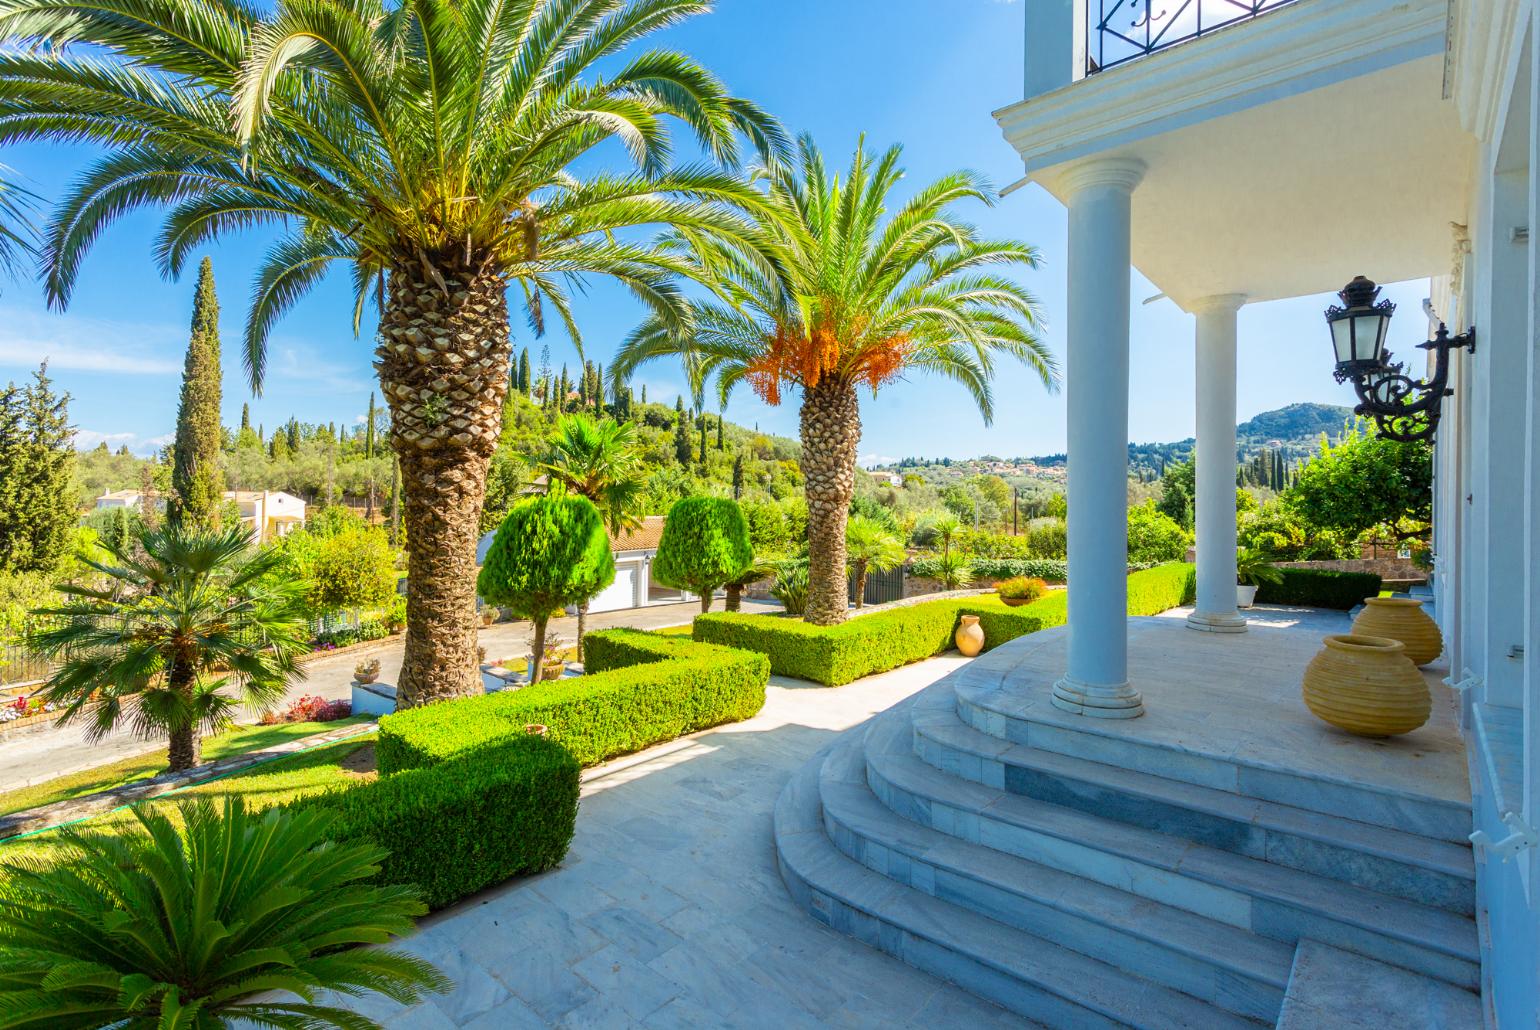 Beautiful villa with private pool, terraces, and large gardens